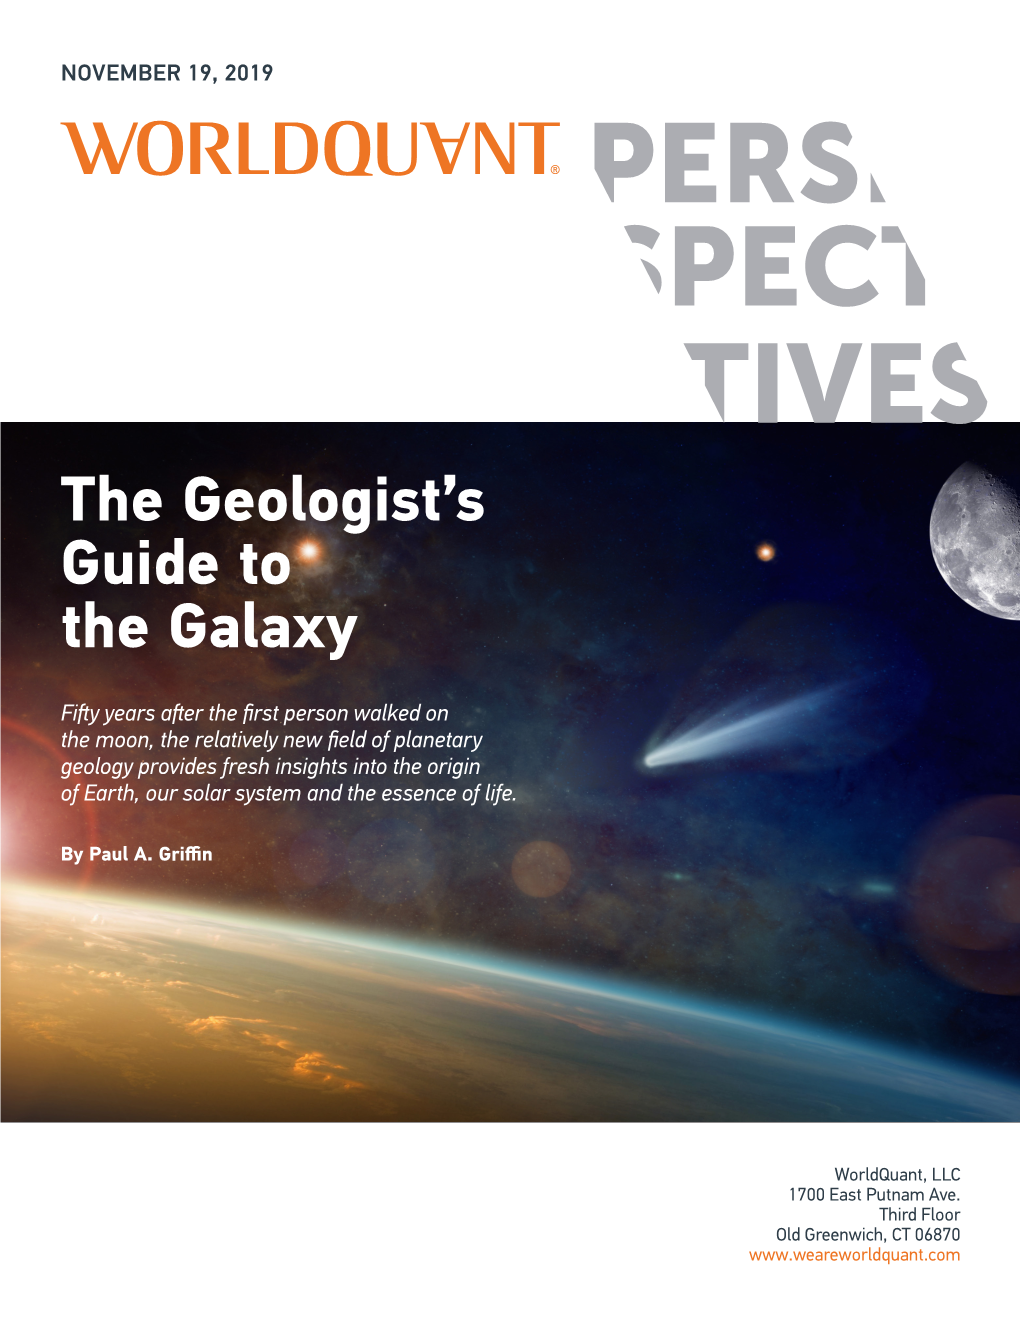 The Geologist's Guide to the Galaxy